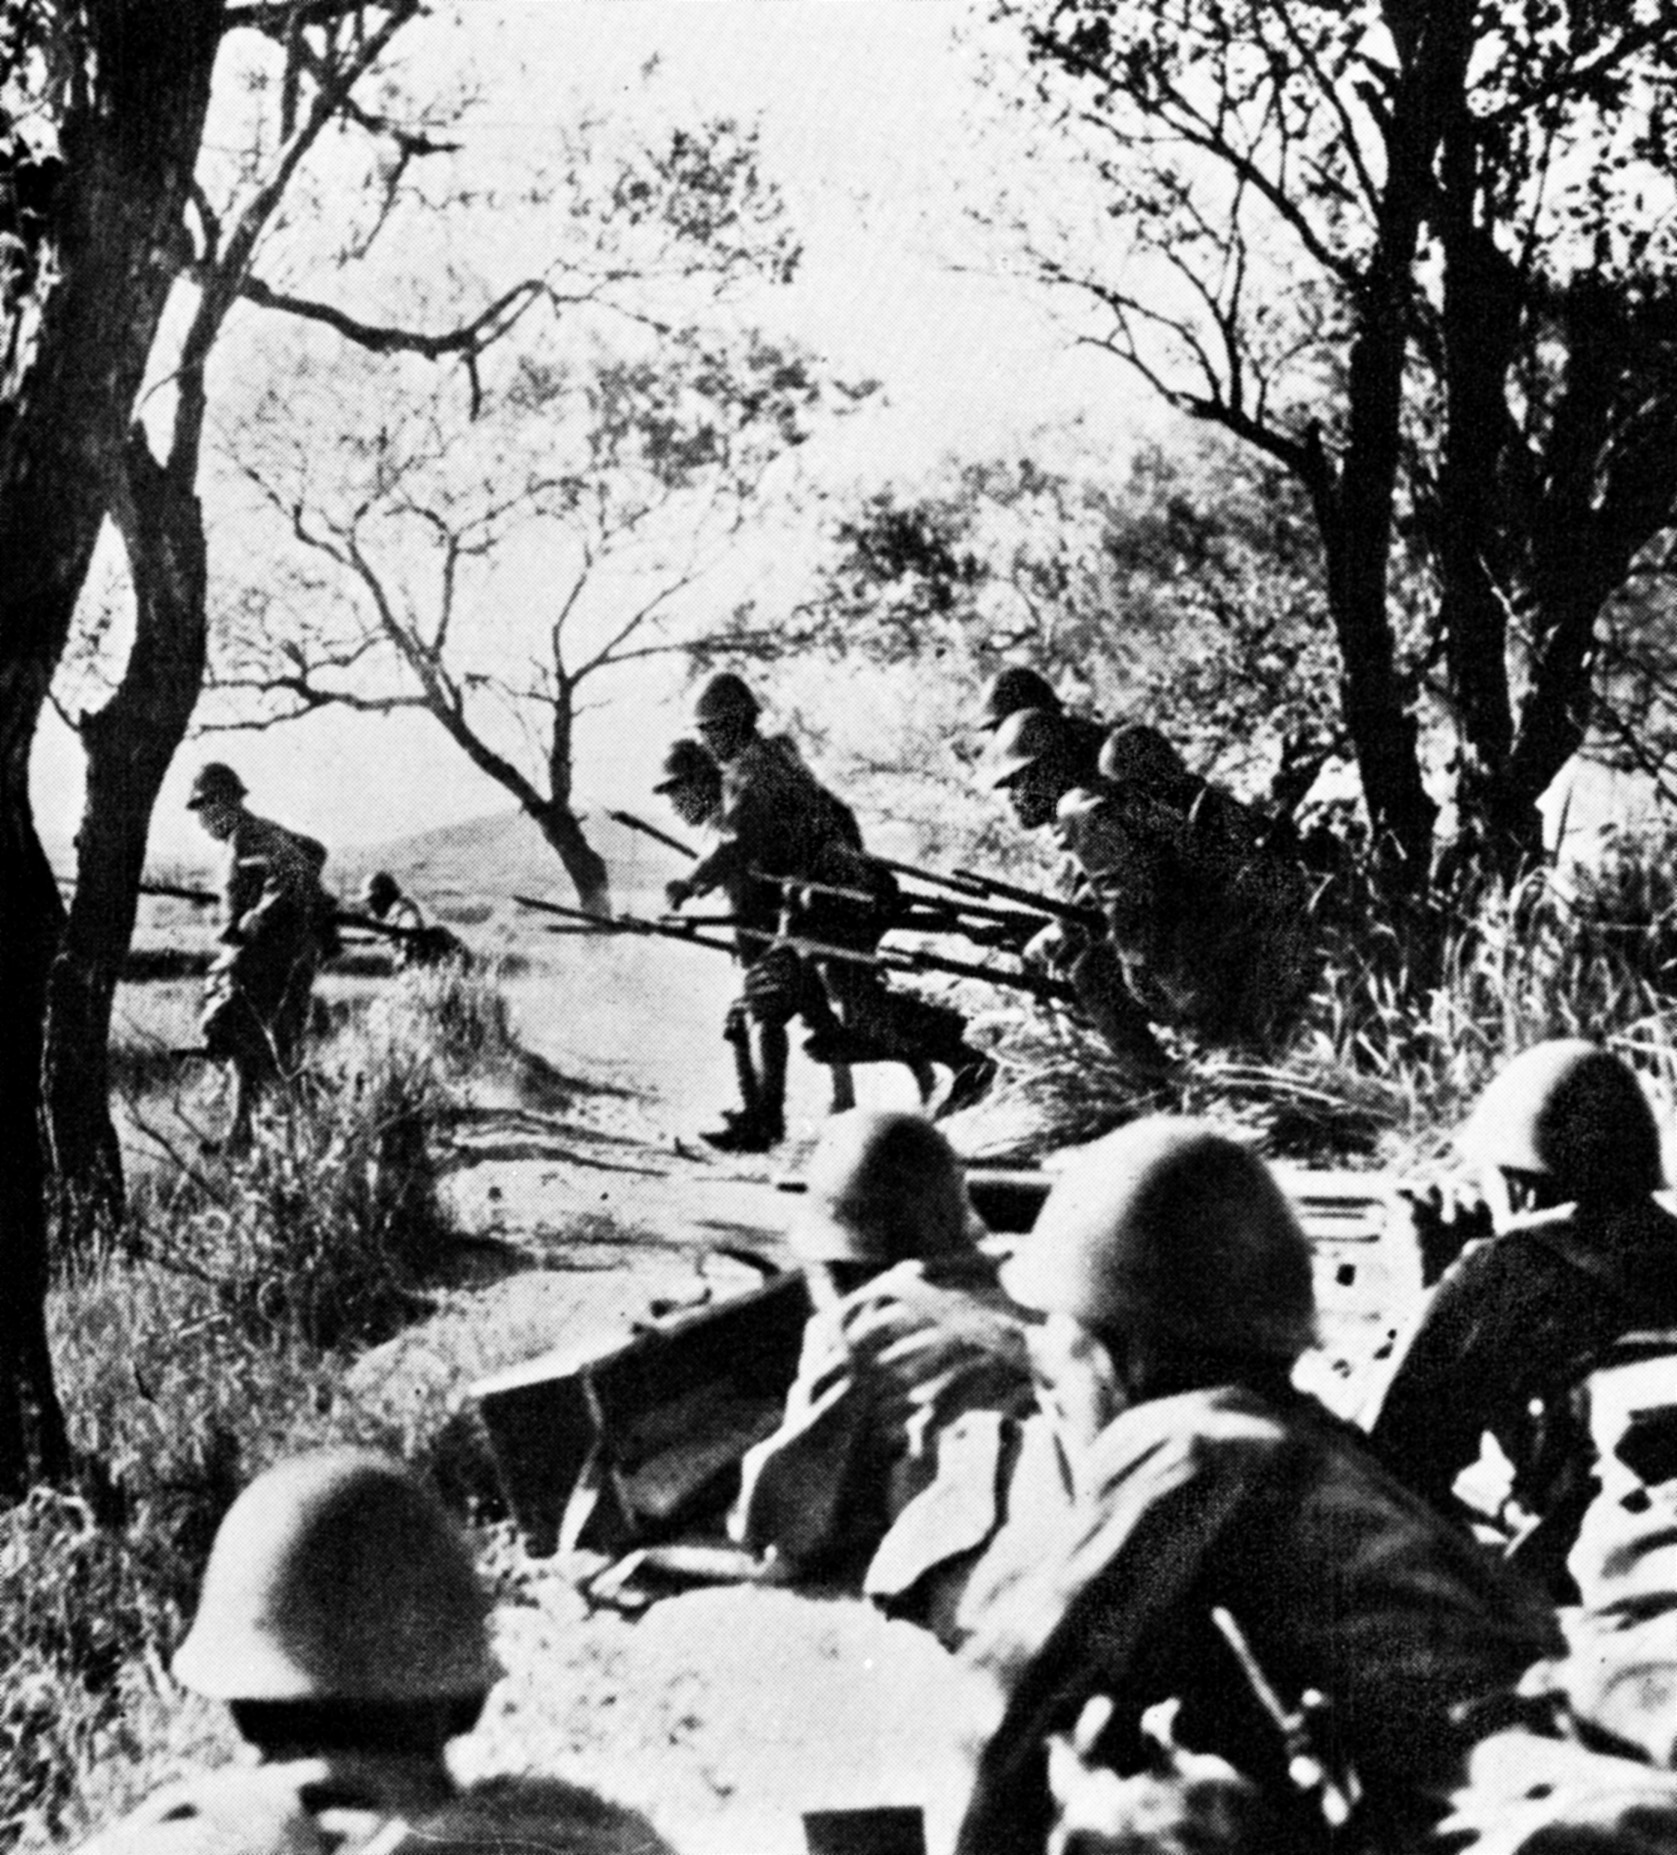 Battle-hardened and disciplined Japanese soldiers charge from the cover of a trench line as a machine-gun crew prepares to fire in support of their attack in Burma. General Slim, who assumed command of the Burma Corps on March 11, 1942, recognized the simple fact that the Allies had been outfought and outgeneraled by the Japanese. 